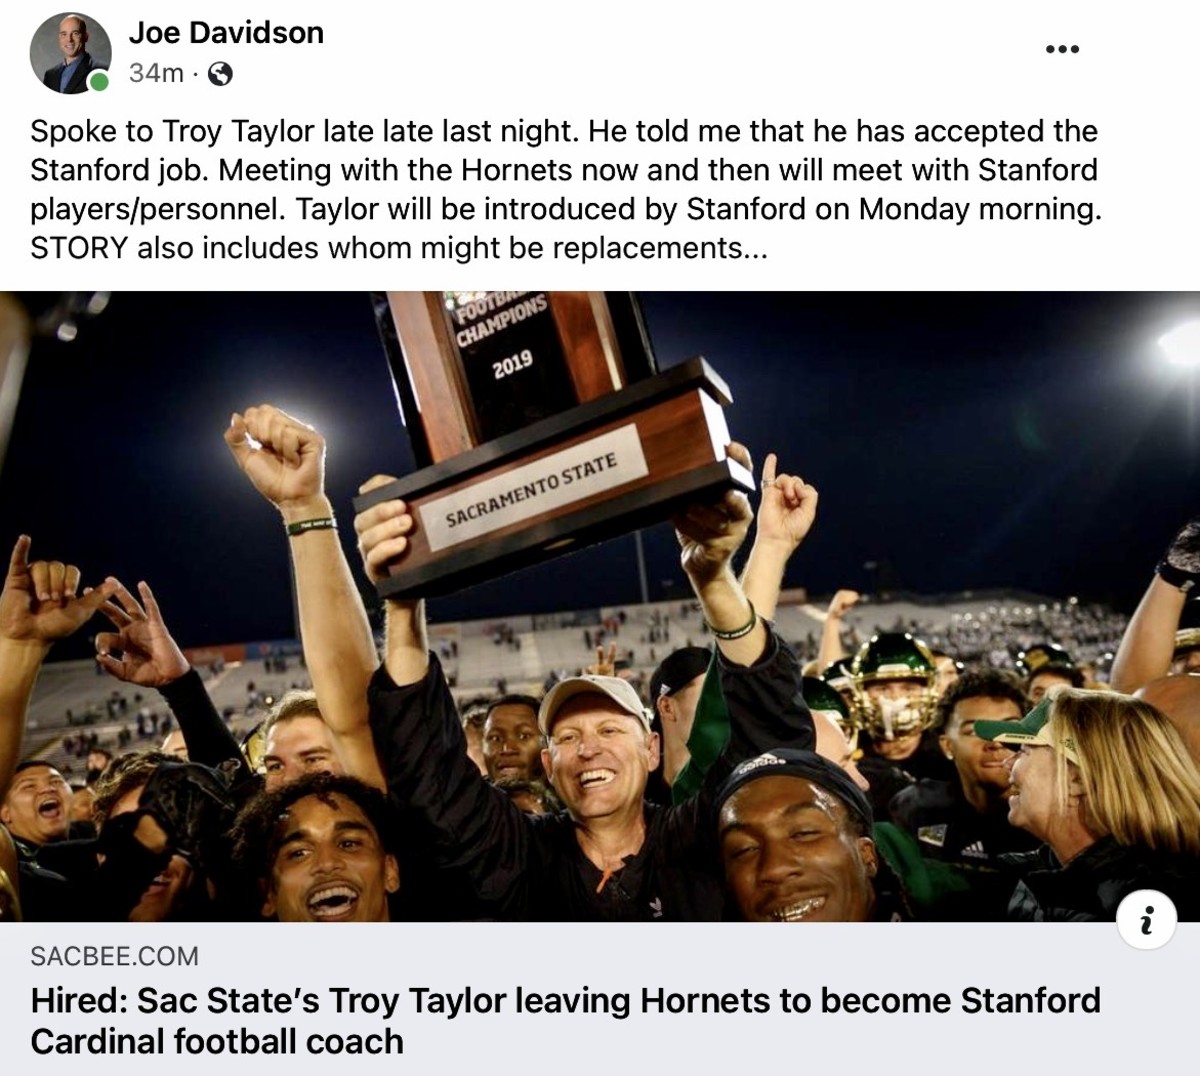 Troy Taylor has reportedly accepted the Stanford coaching job.